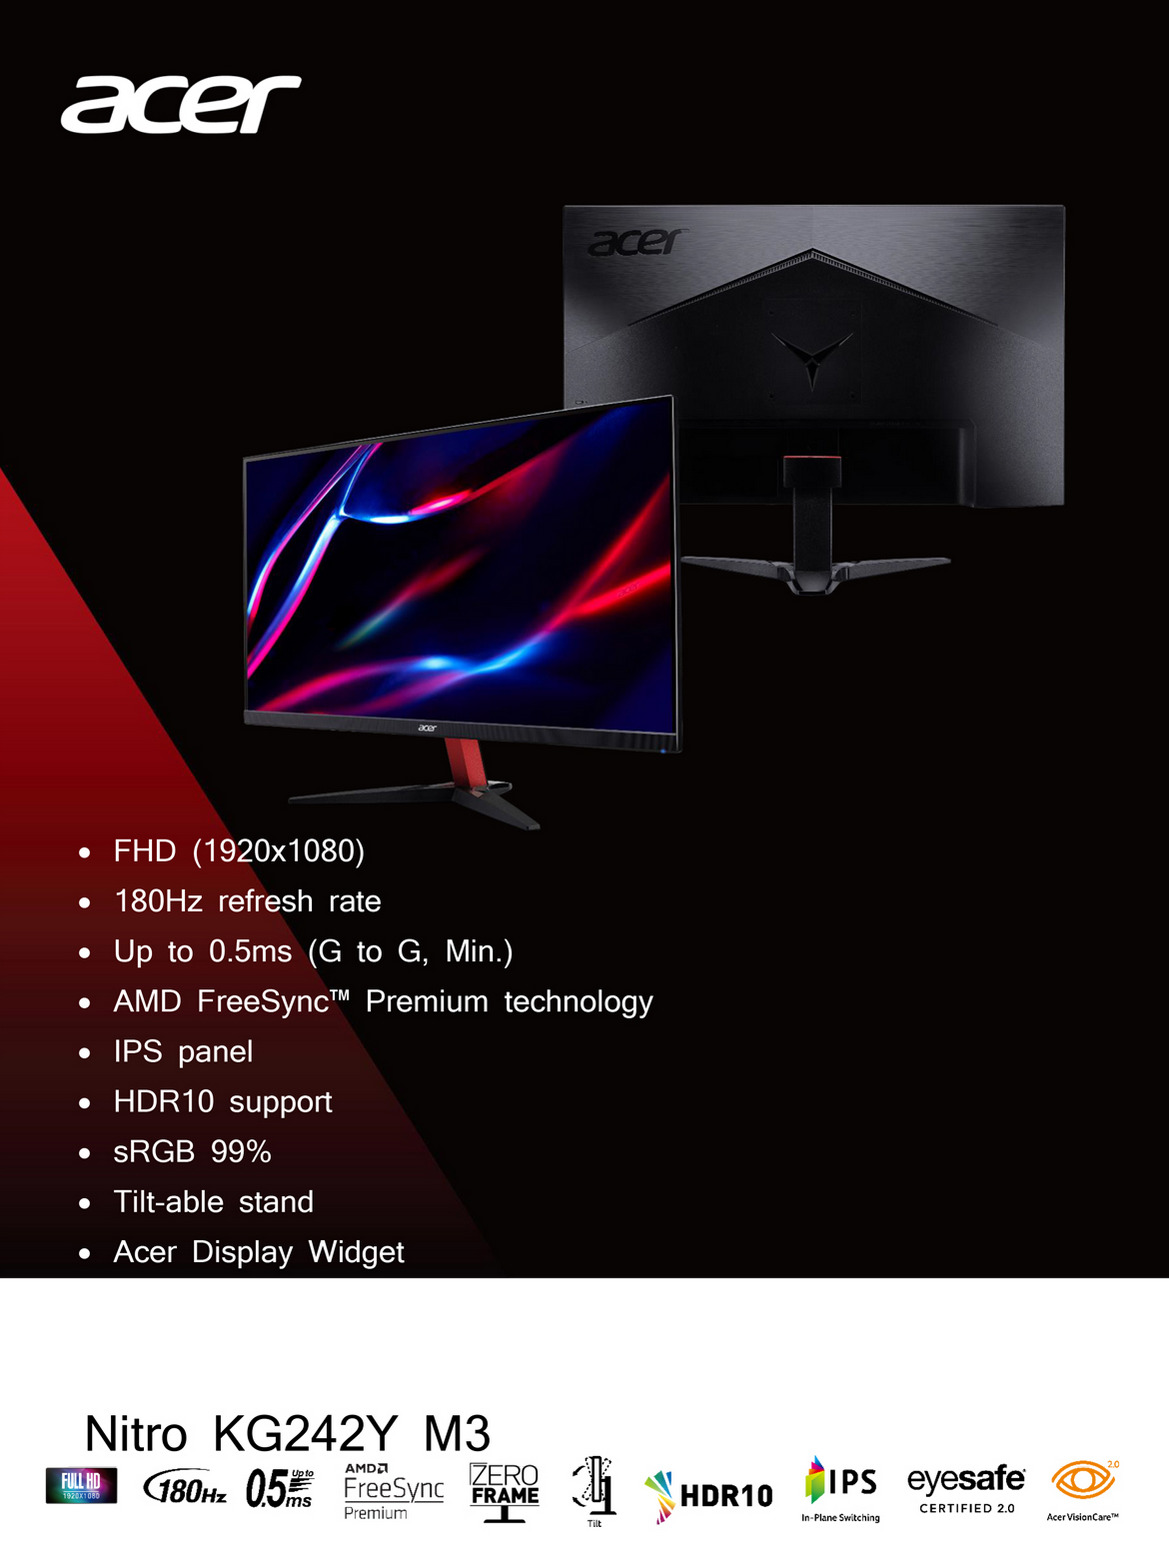 A large marketing image providing additional information about the product Acer Nitro KG242YM3 - 23.8" FHD 180Hz IPS Monitor - Additional alt info not provided